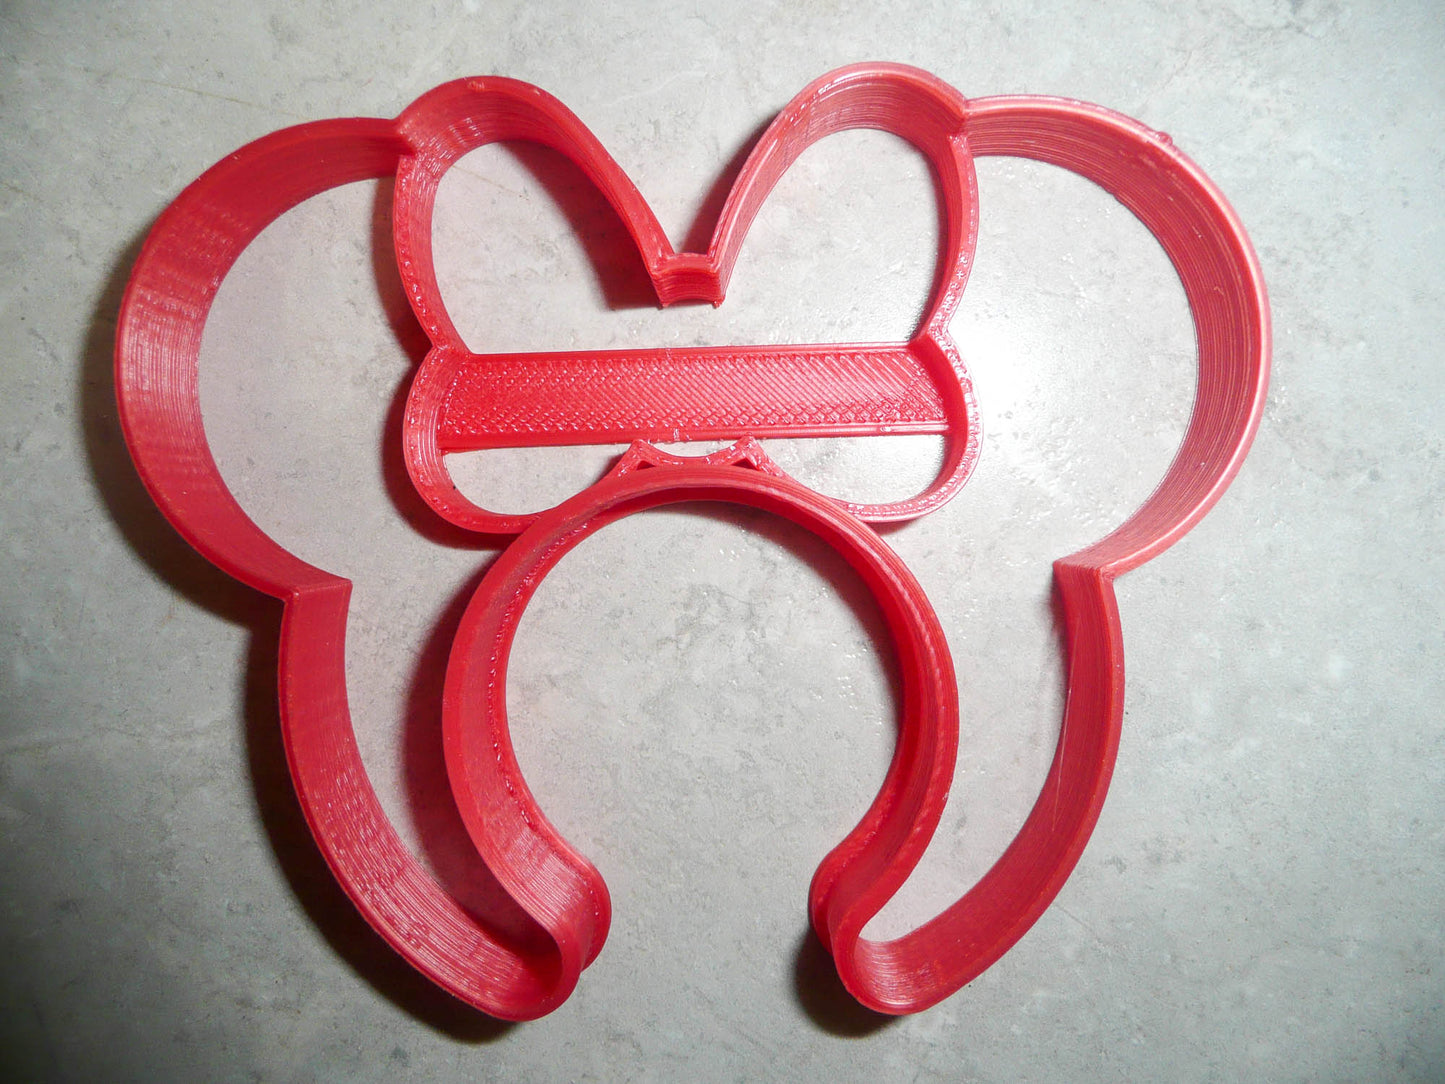 Minnie Mouse Ears Headband With Bow Cartoon Character Cookie Cutter USA PR3309